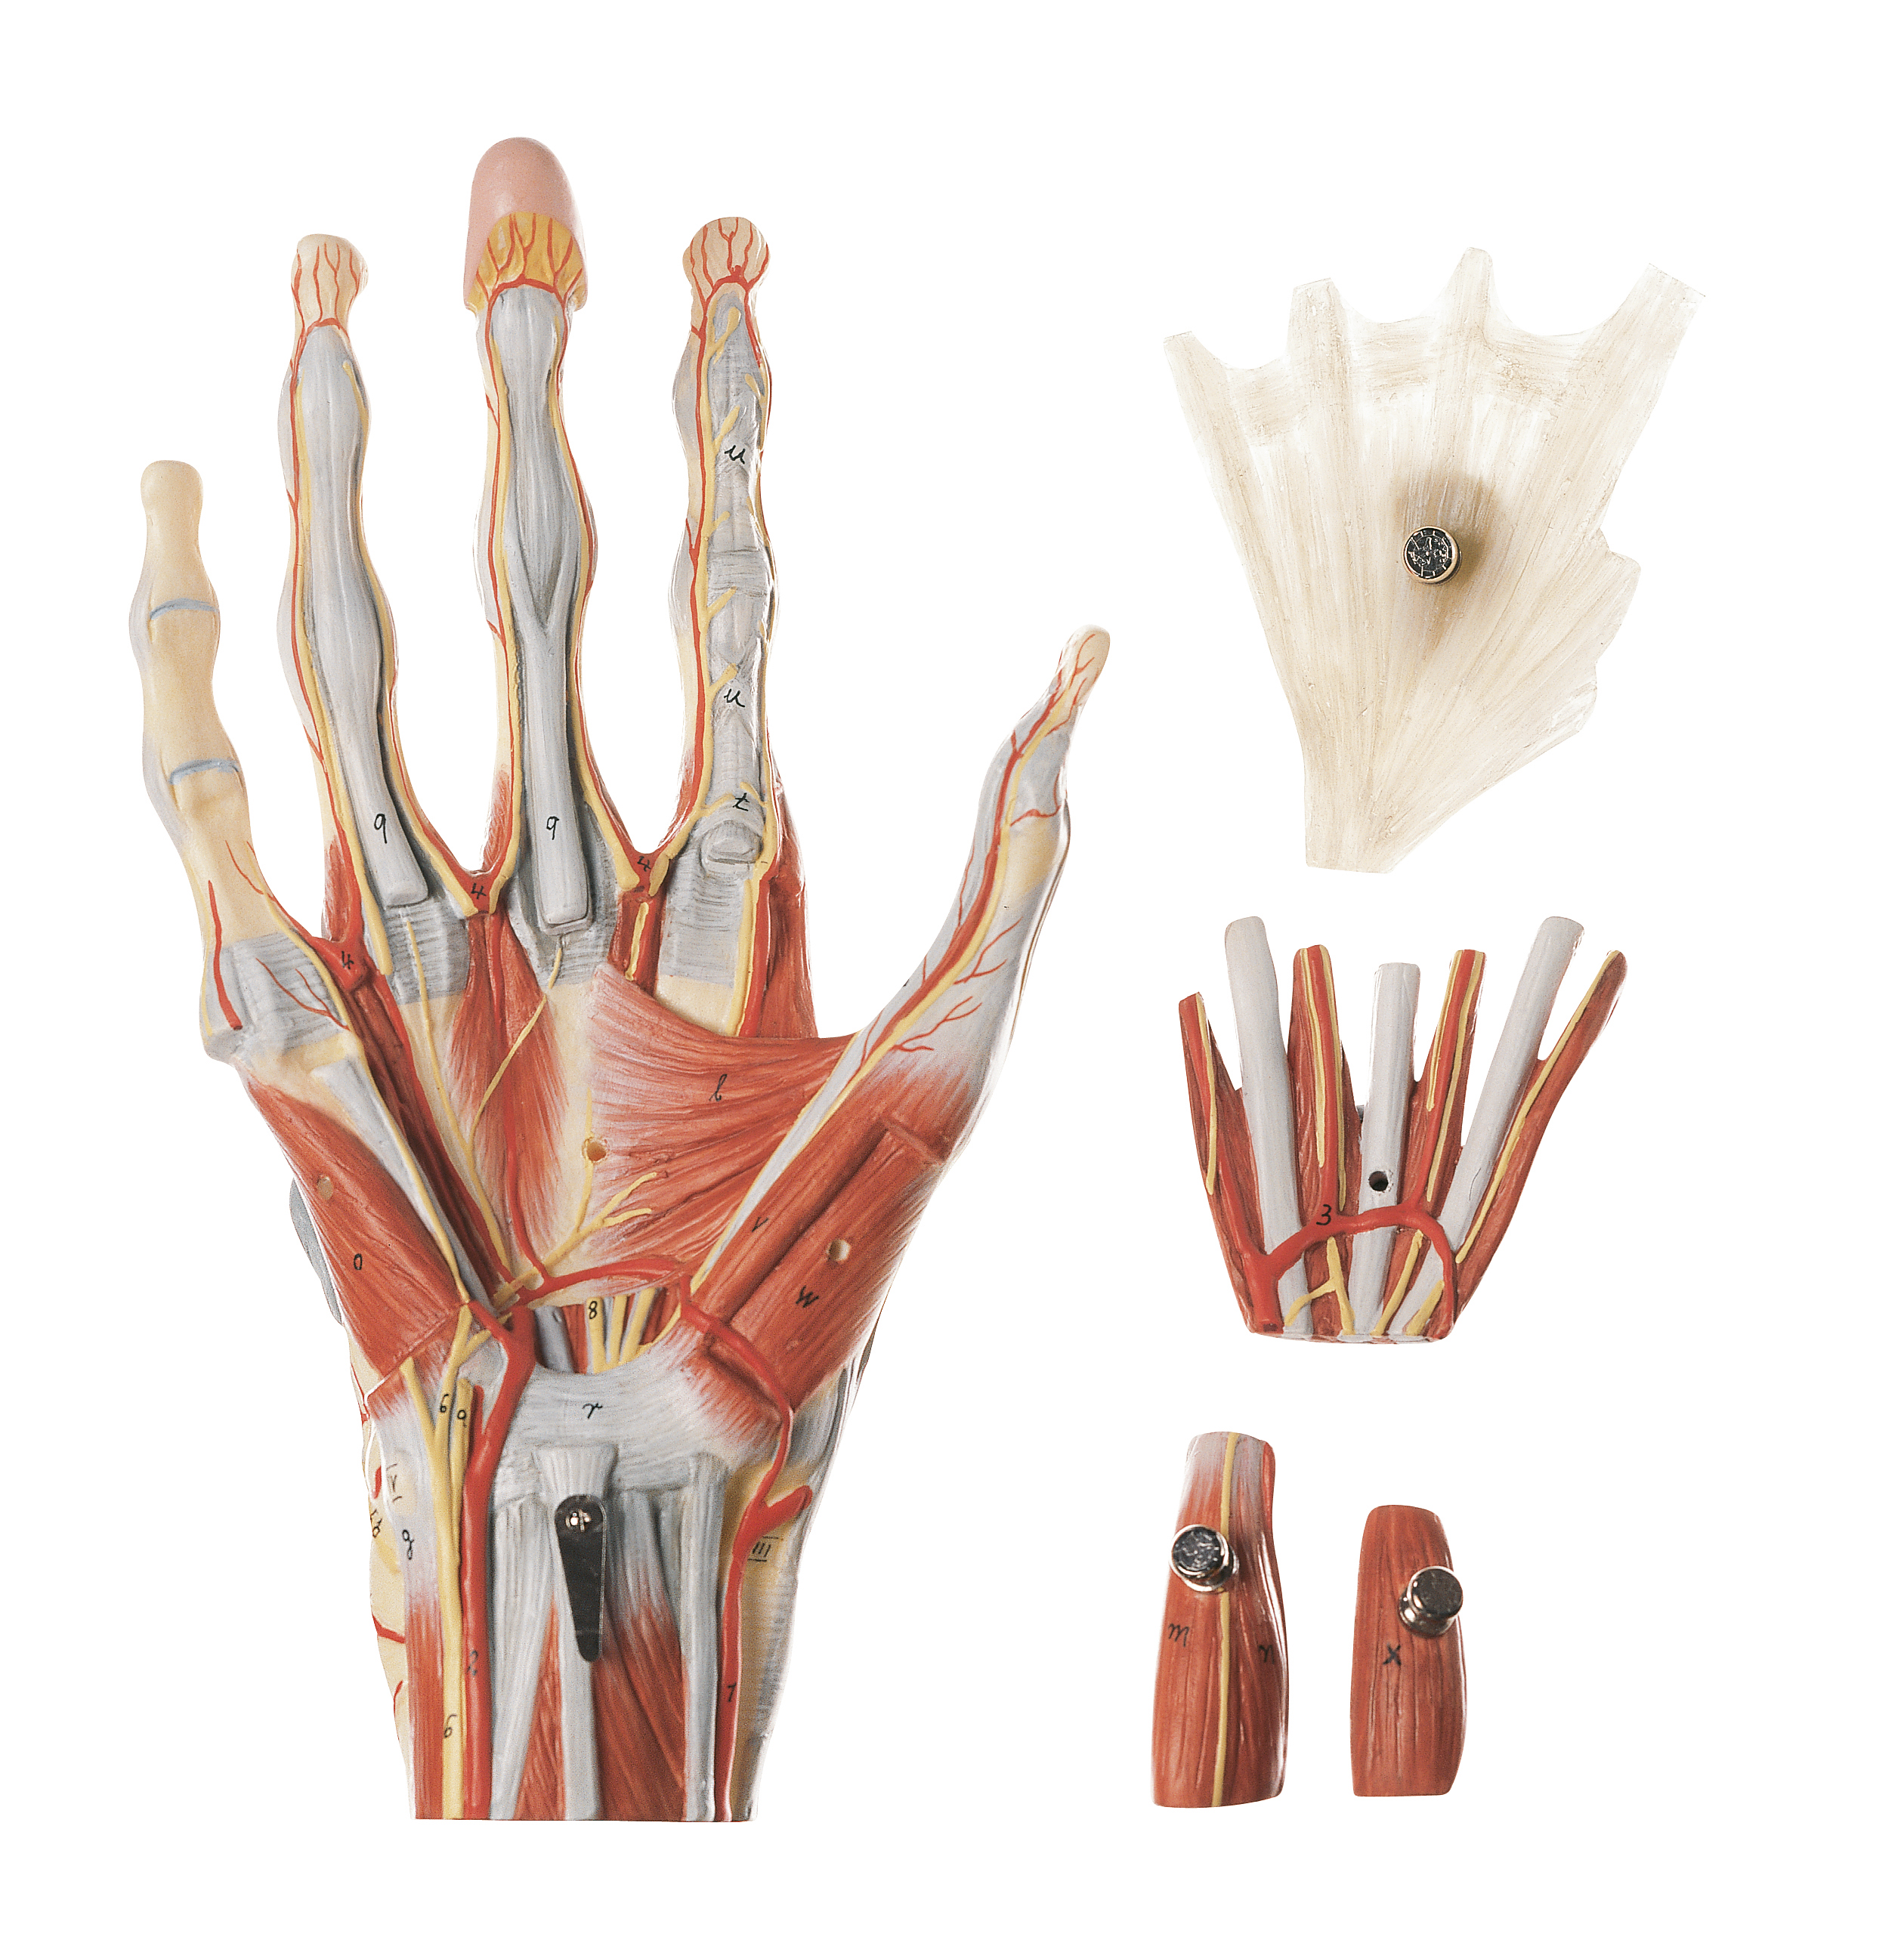 Muscles of the Hand with Base of Fore-Arm